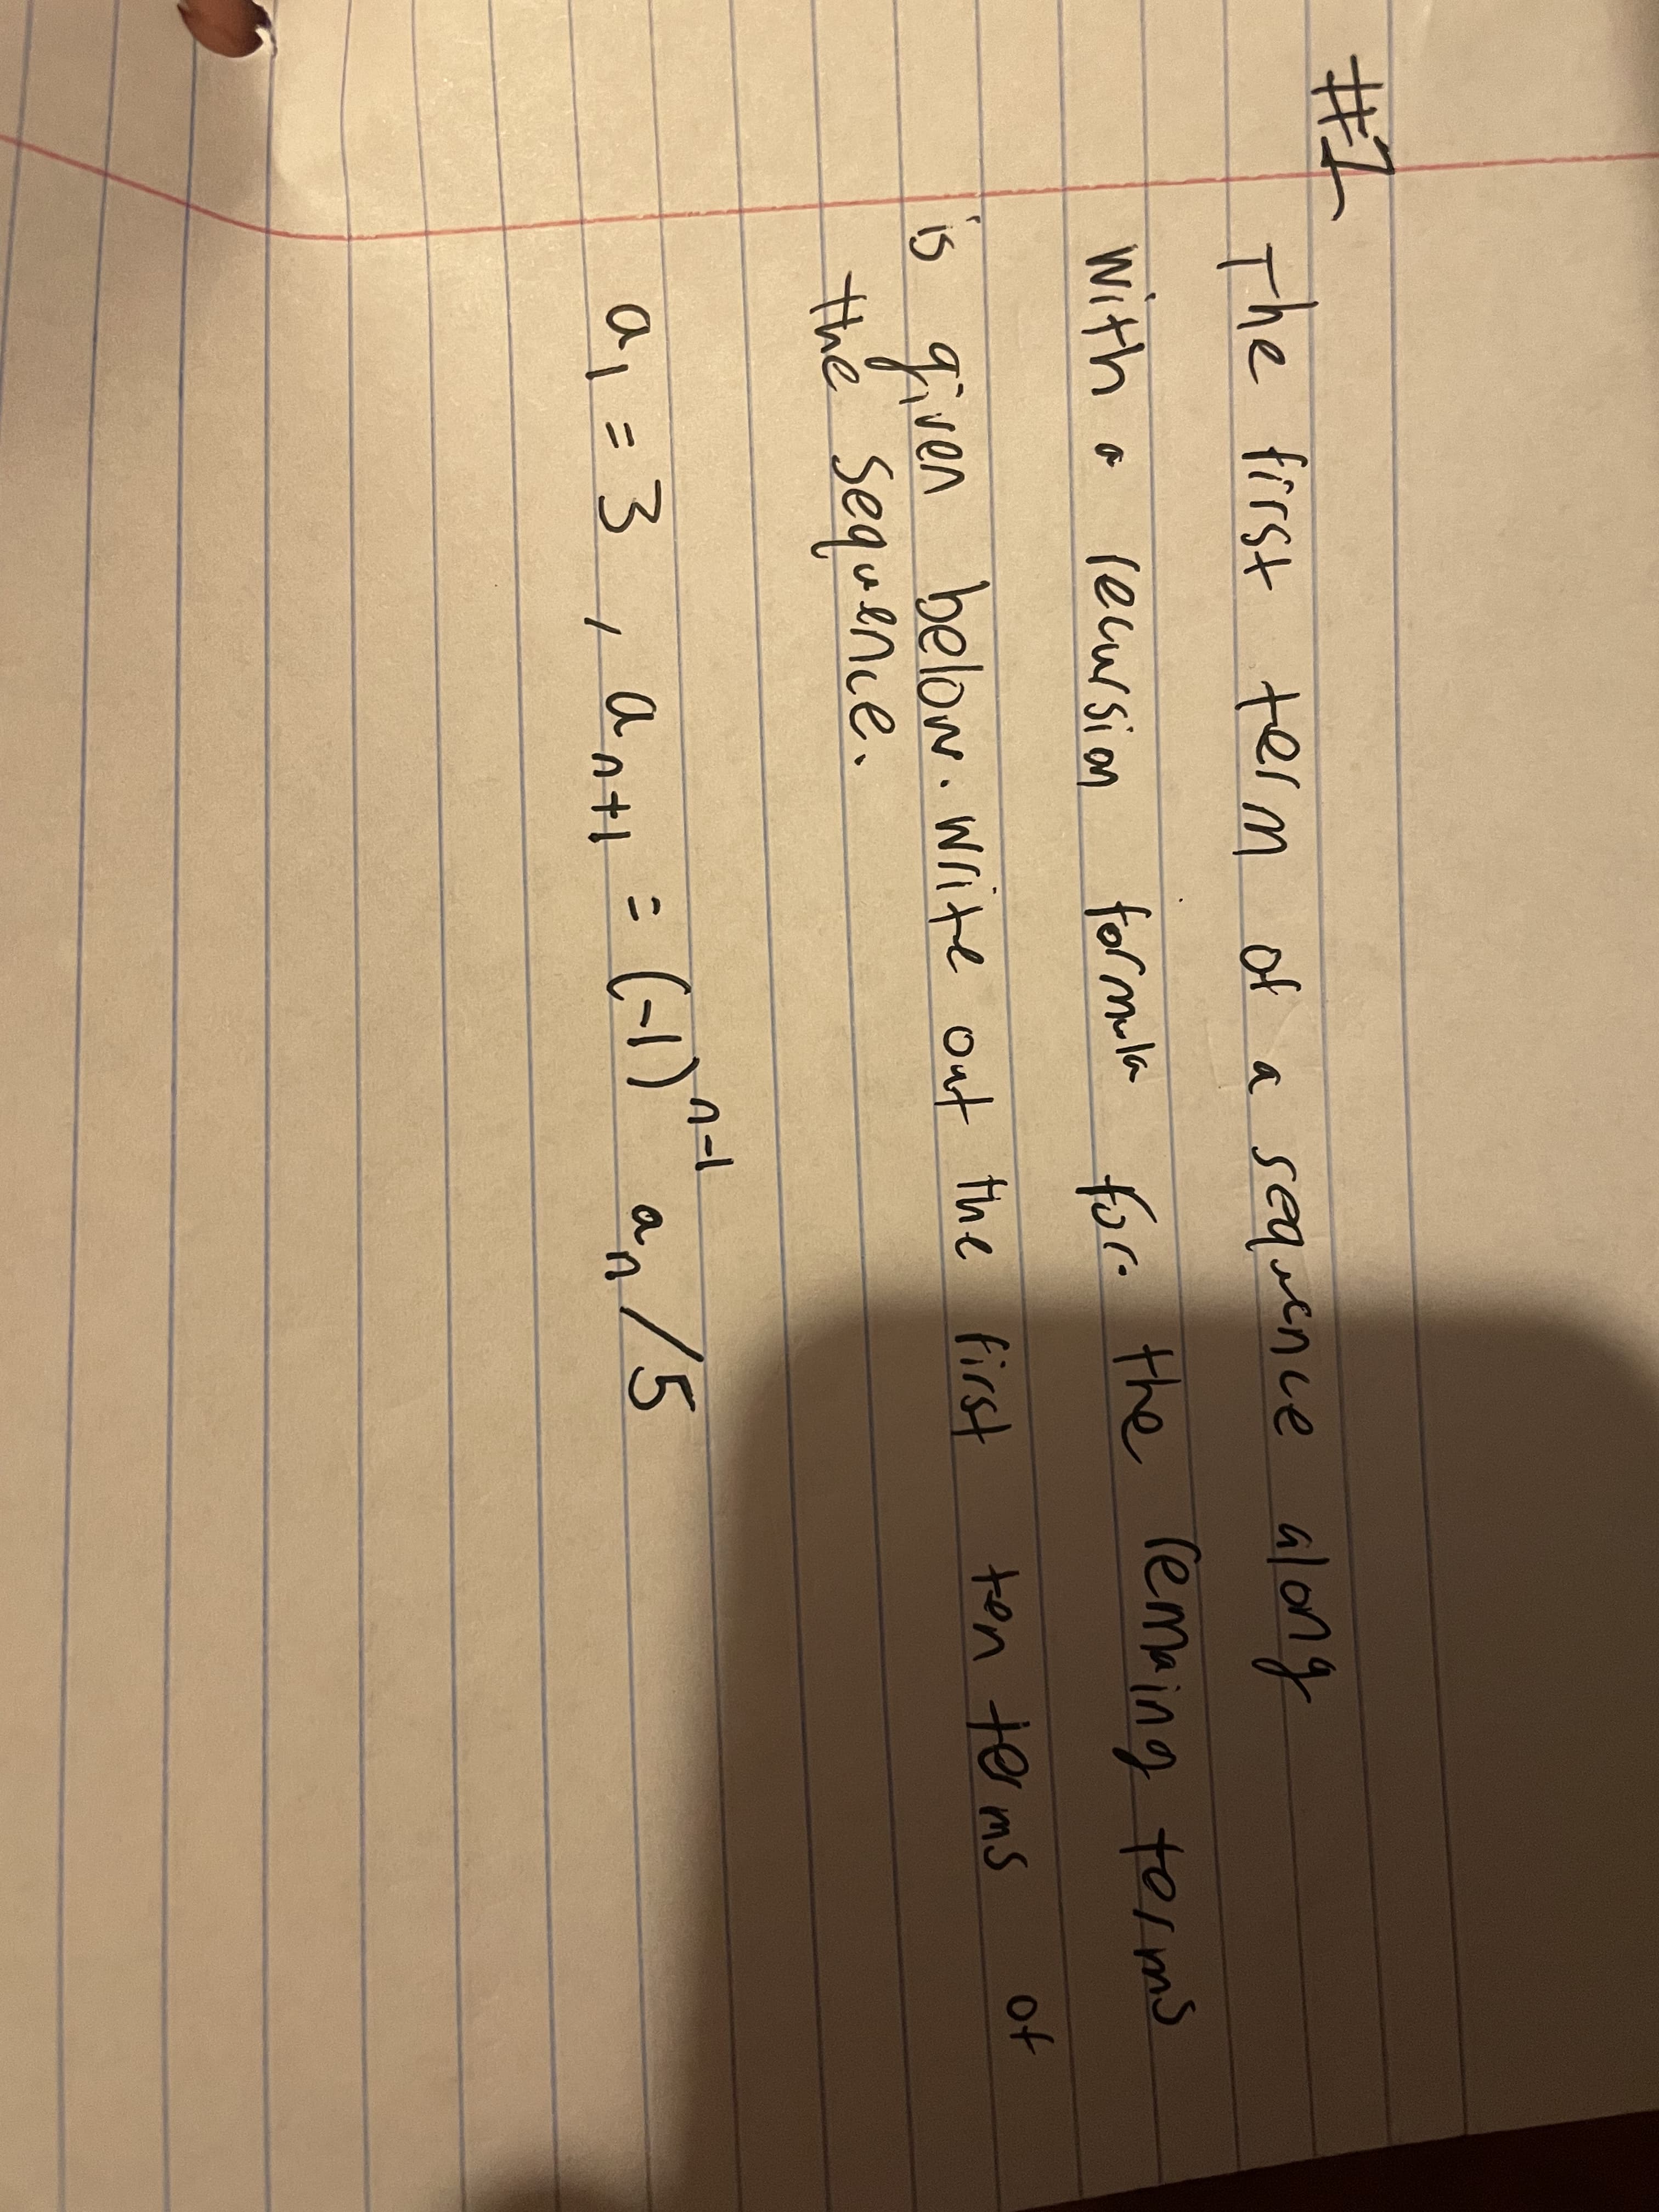 The first along
term of a sequence
with a
(ecursion
formila e the lemaing terms
for-
B given beloN. Write Out the First
the Sequence.
is
below. Write
ton te ms
of
a,=3 ,antt
an/5
